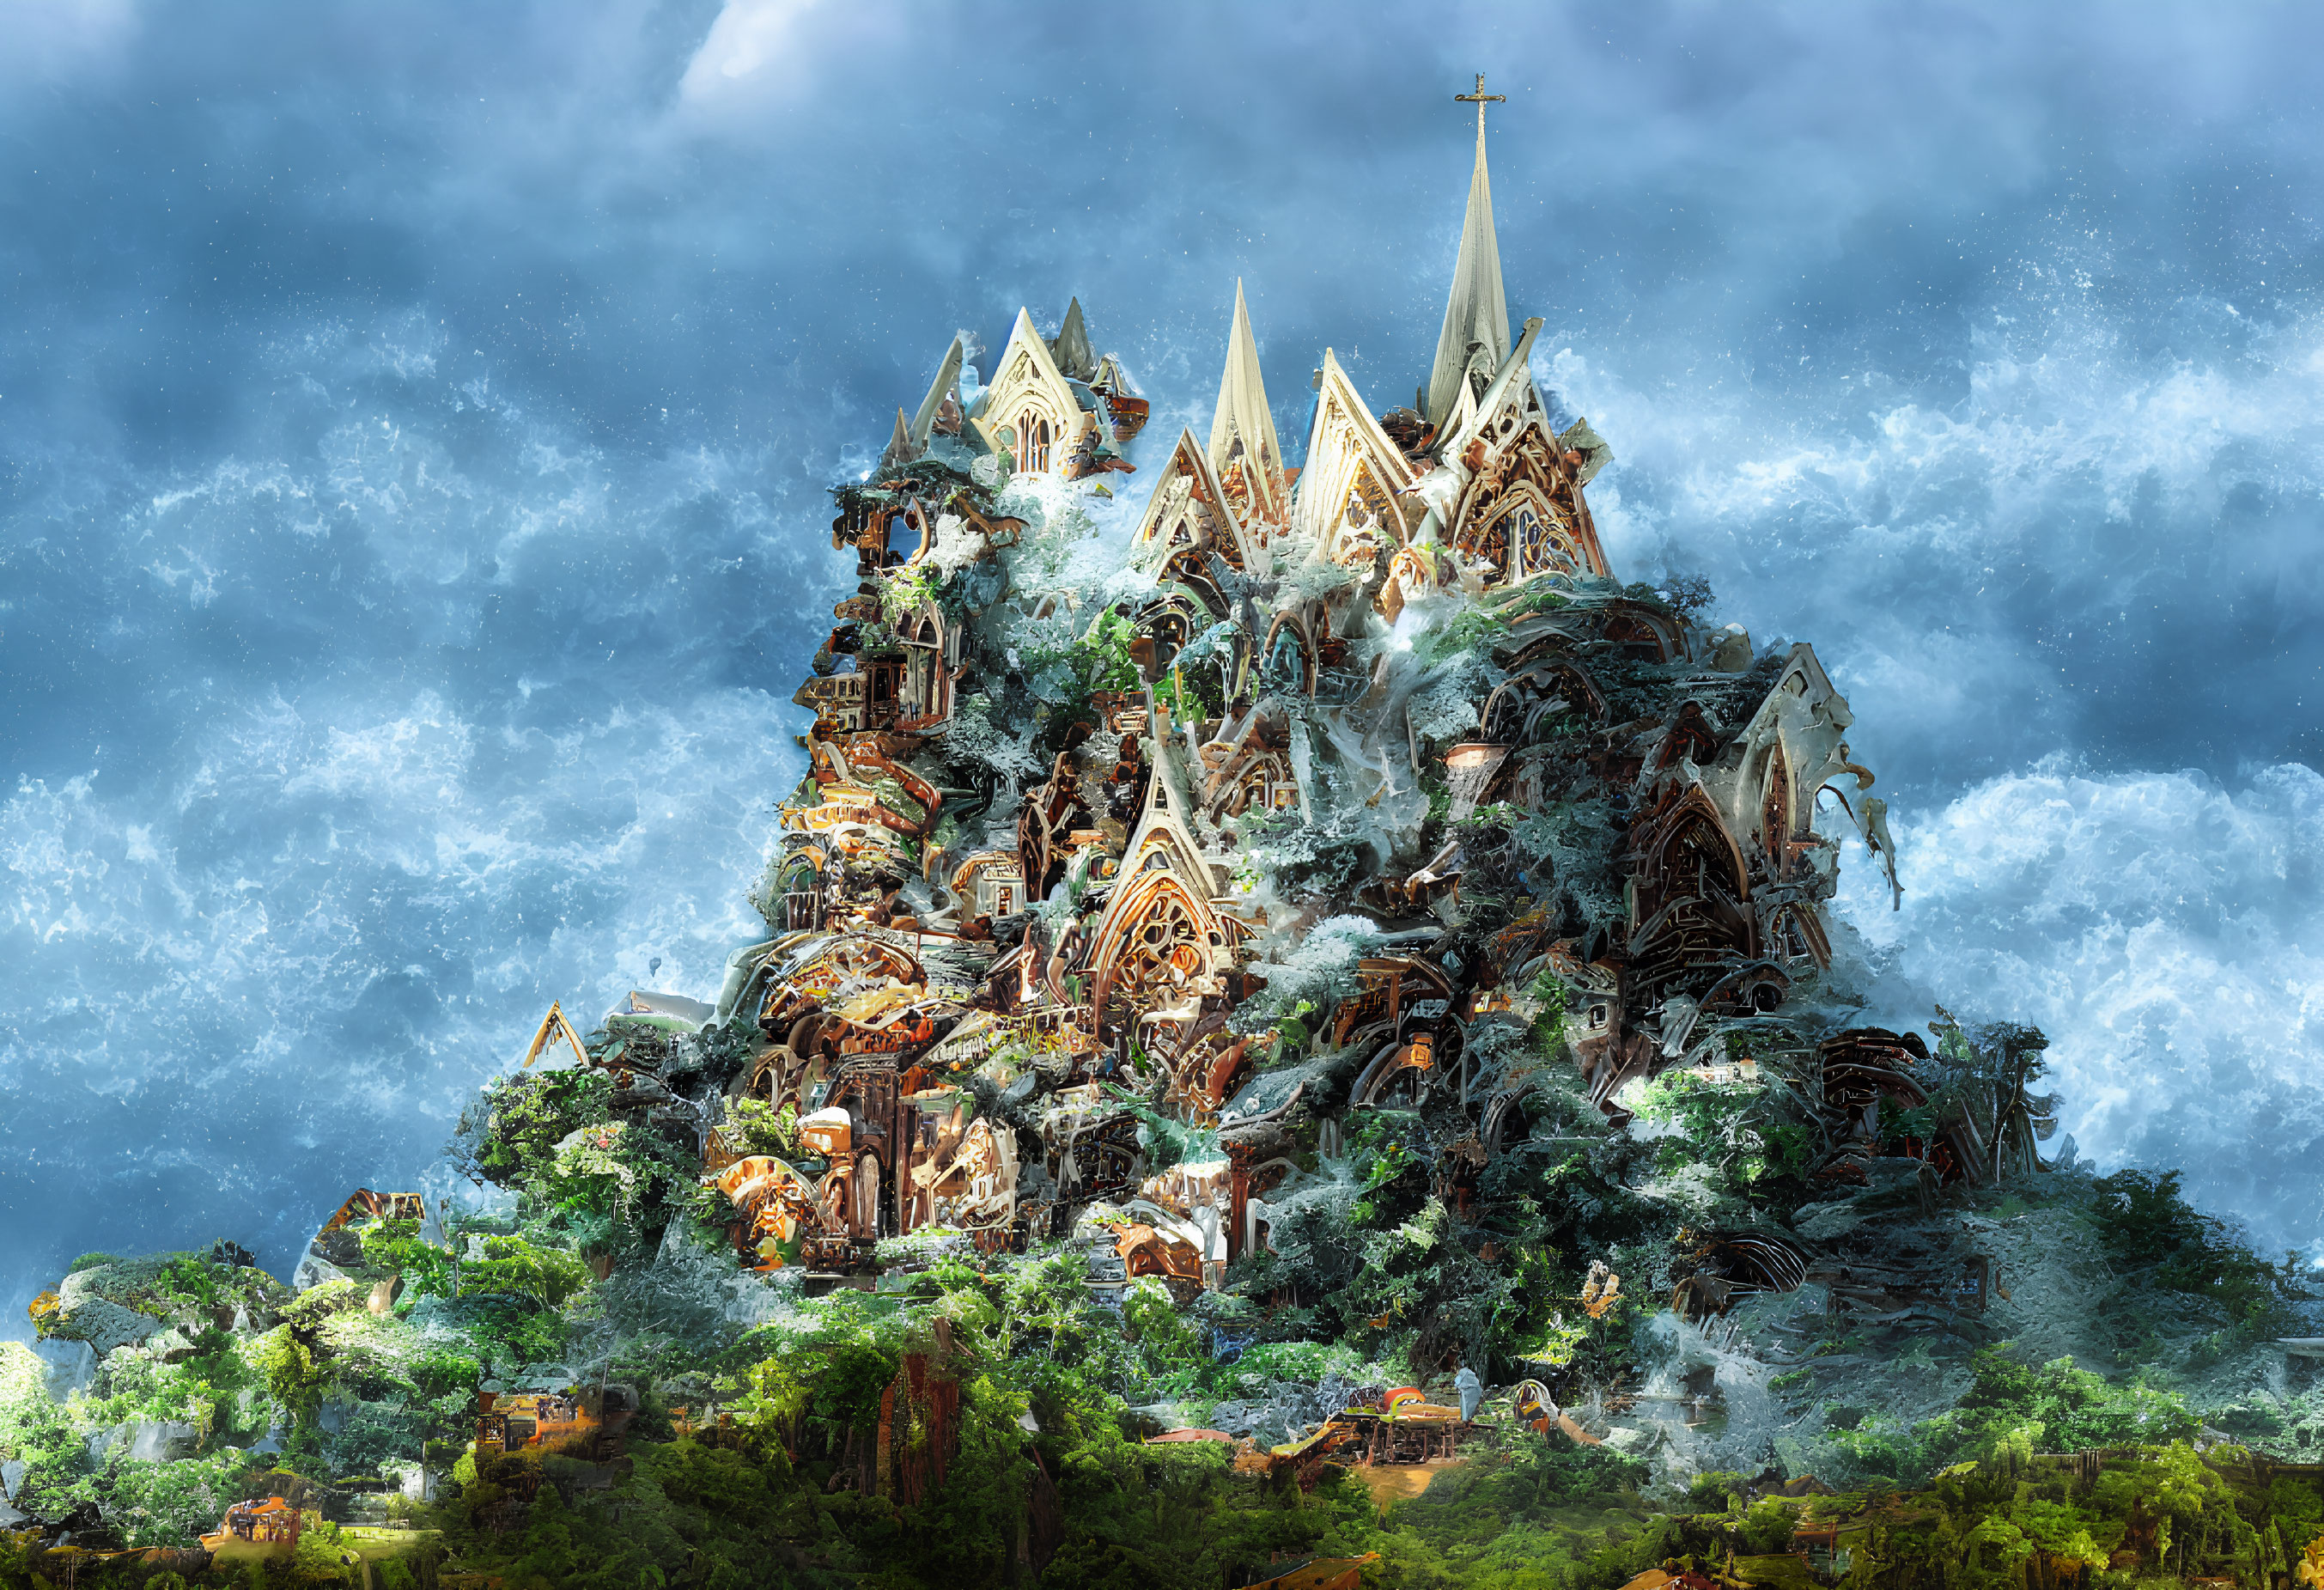 Fantasy castle with pointed spires on mountain surrounded by clouds and greenery